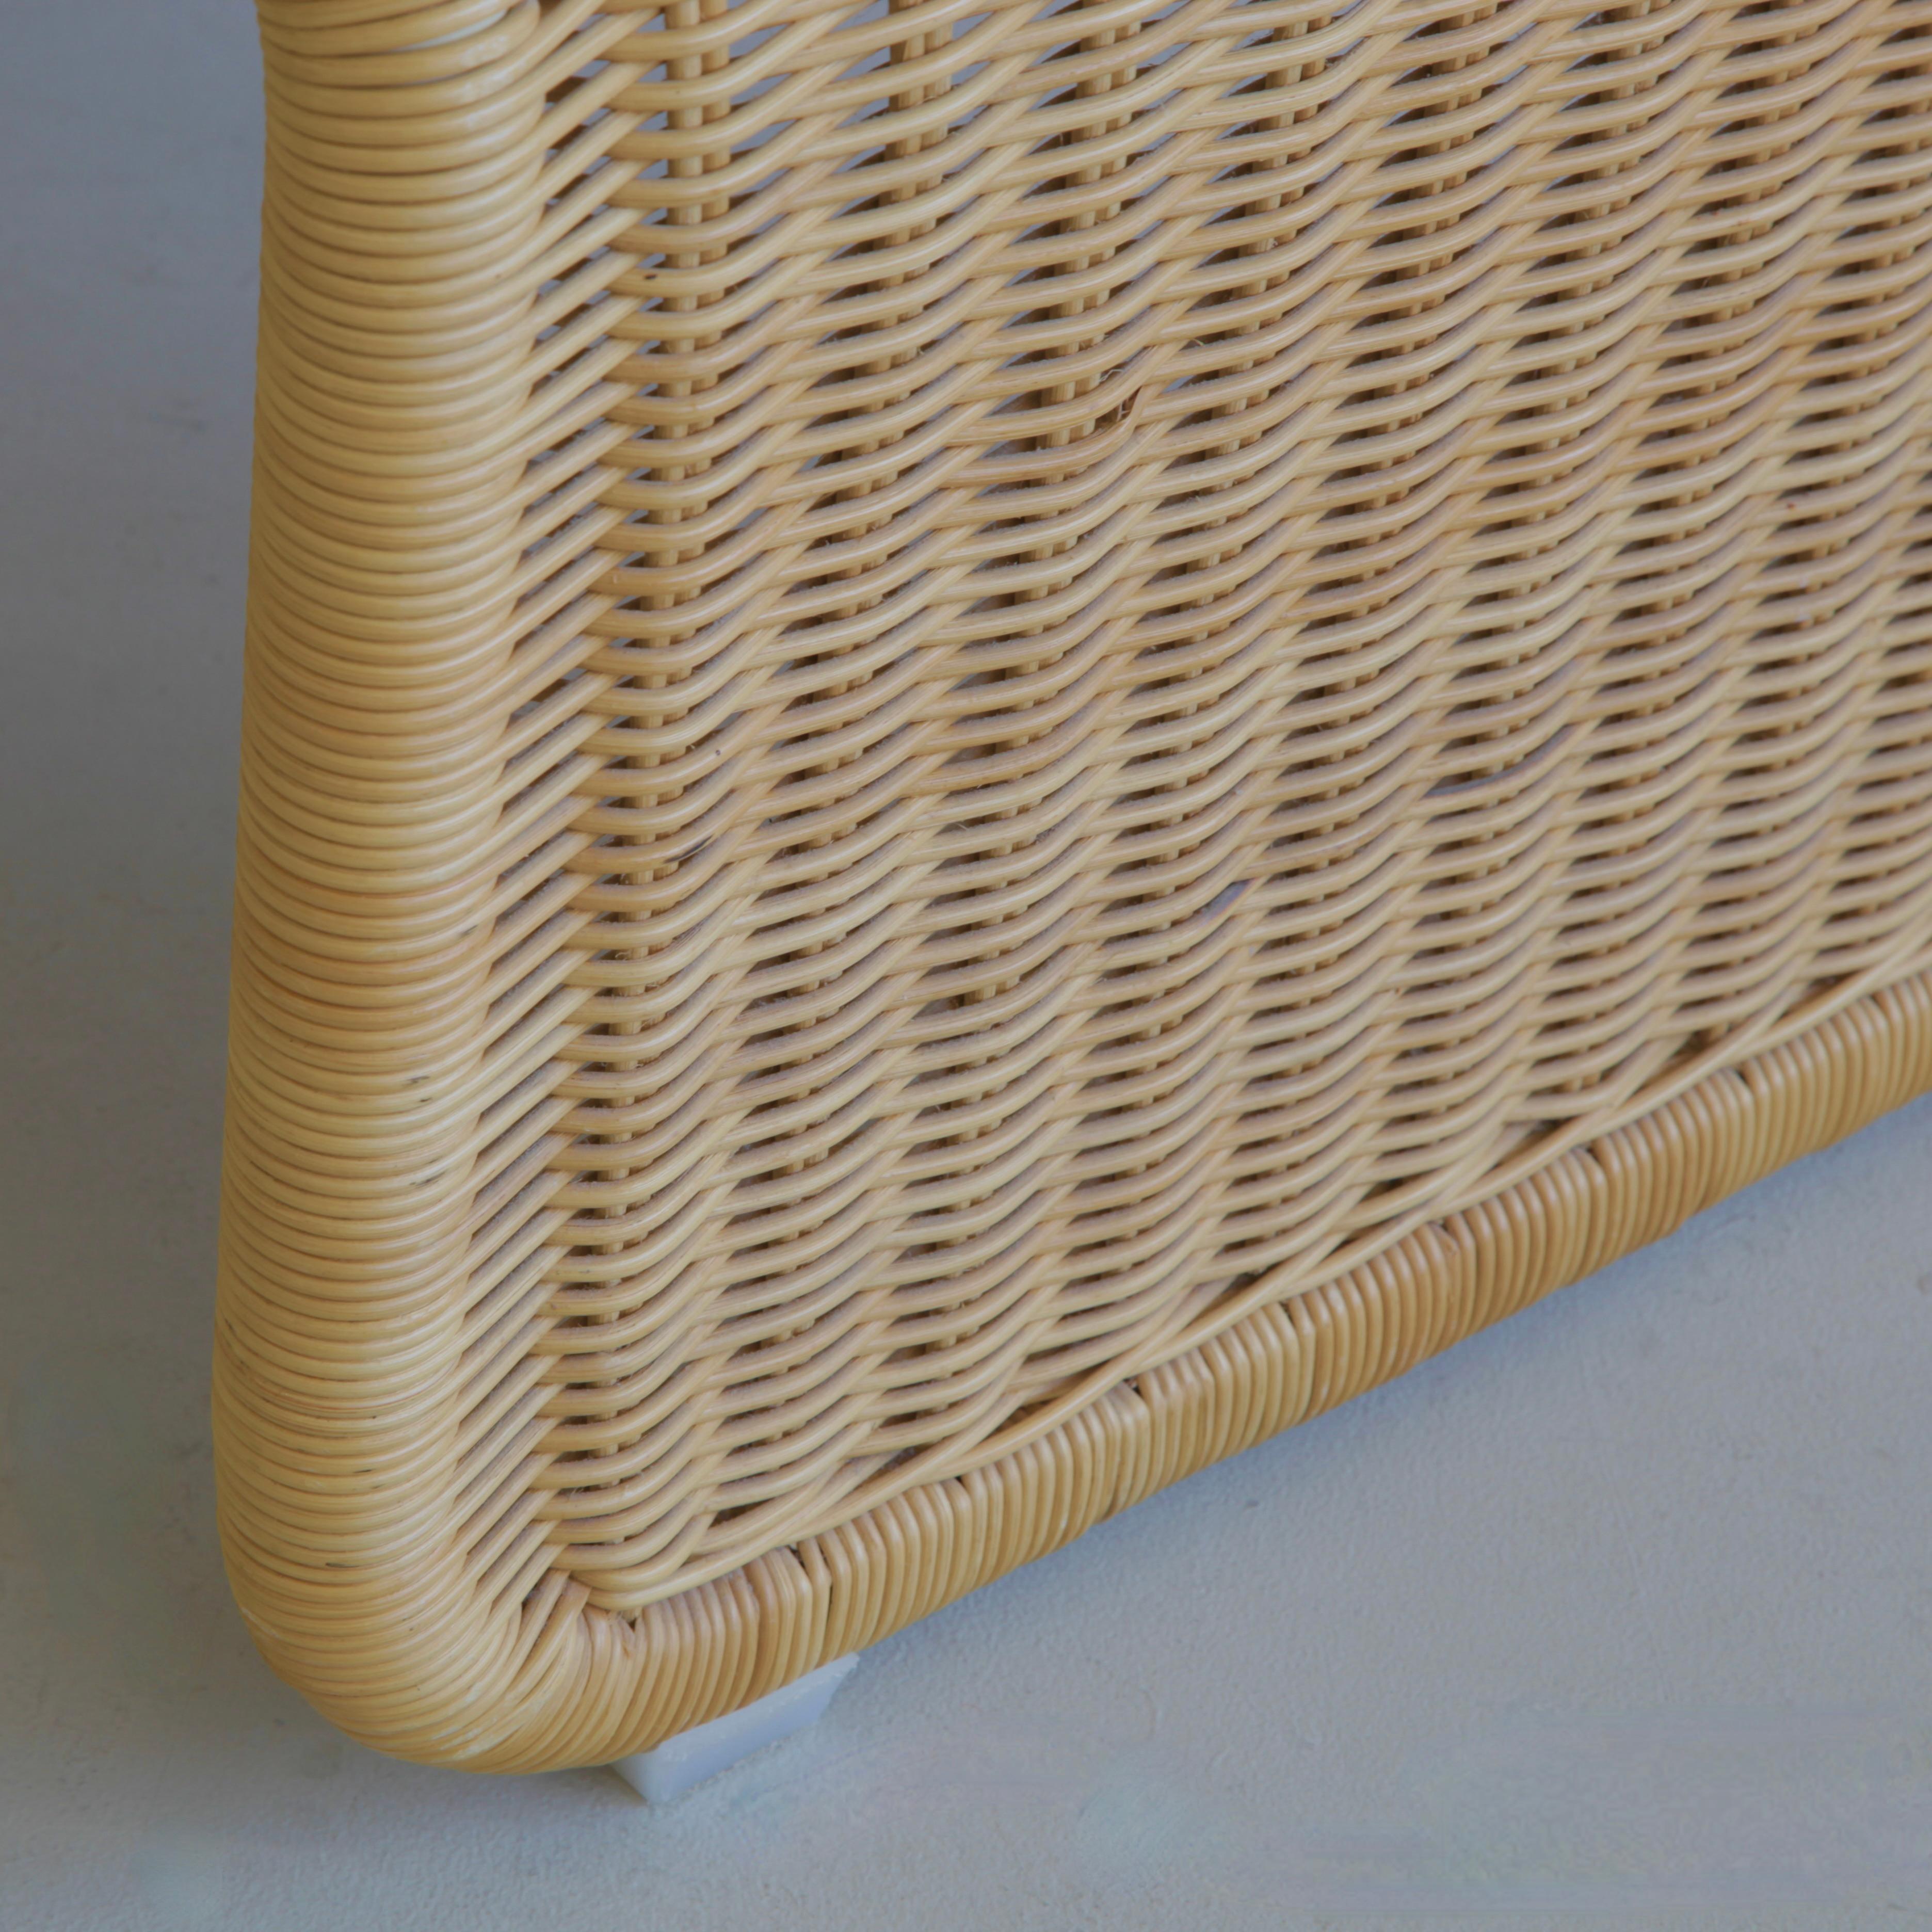 Mid-Century Modern Rattan Chaise lounge PS3 by Tito Agnoli for Bonacina, 1964 For Sale